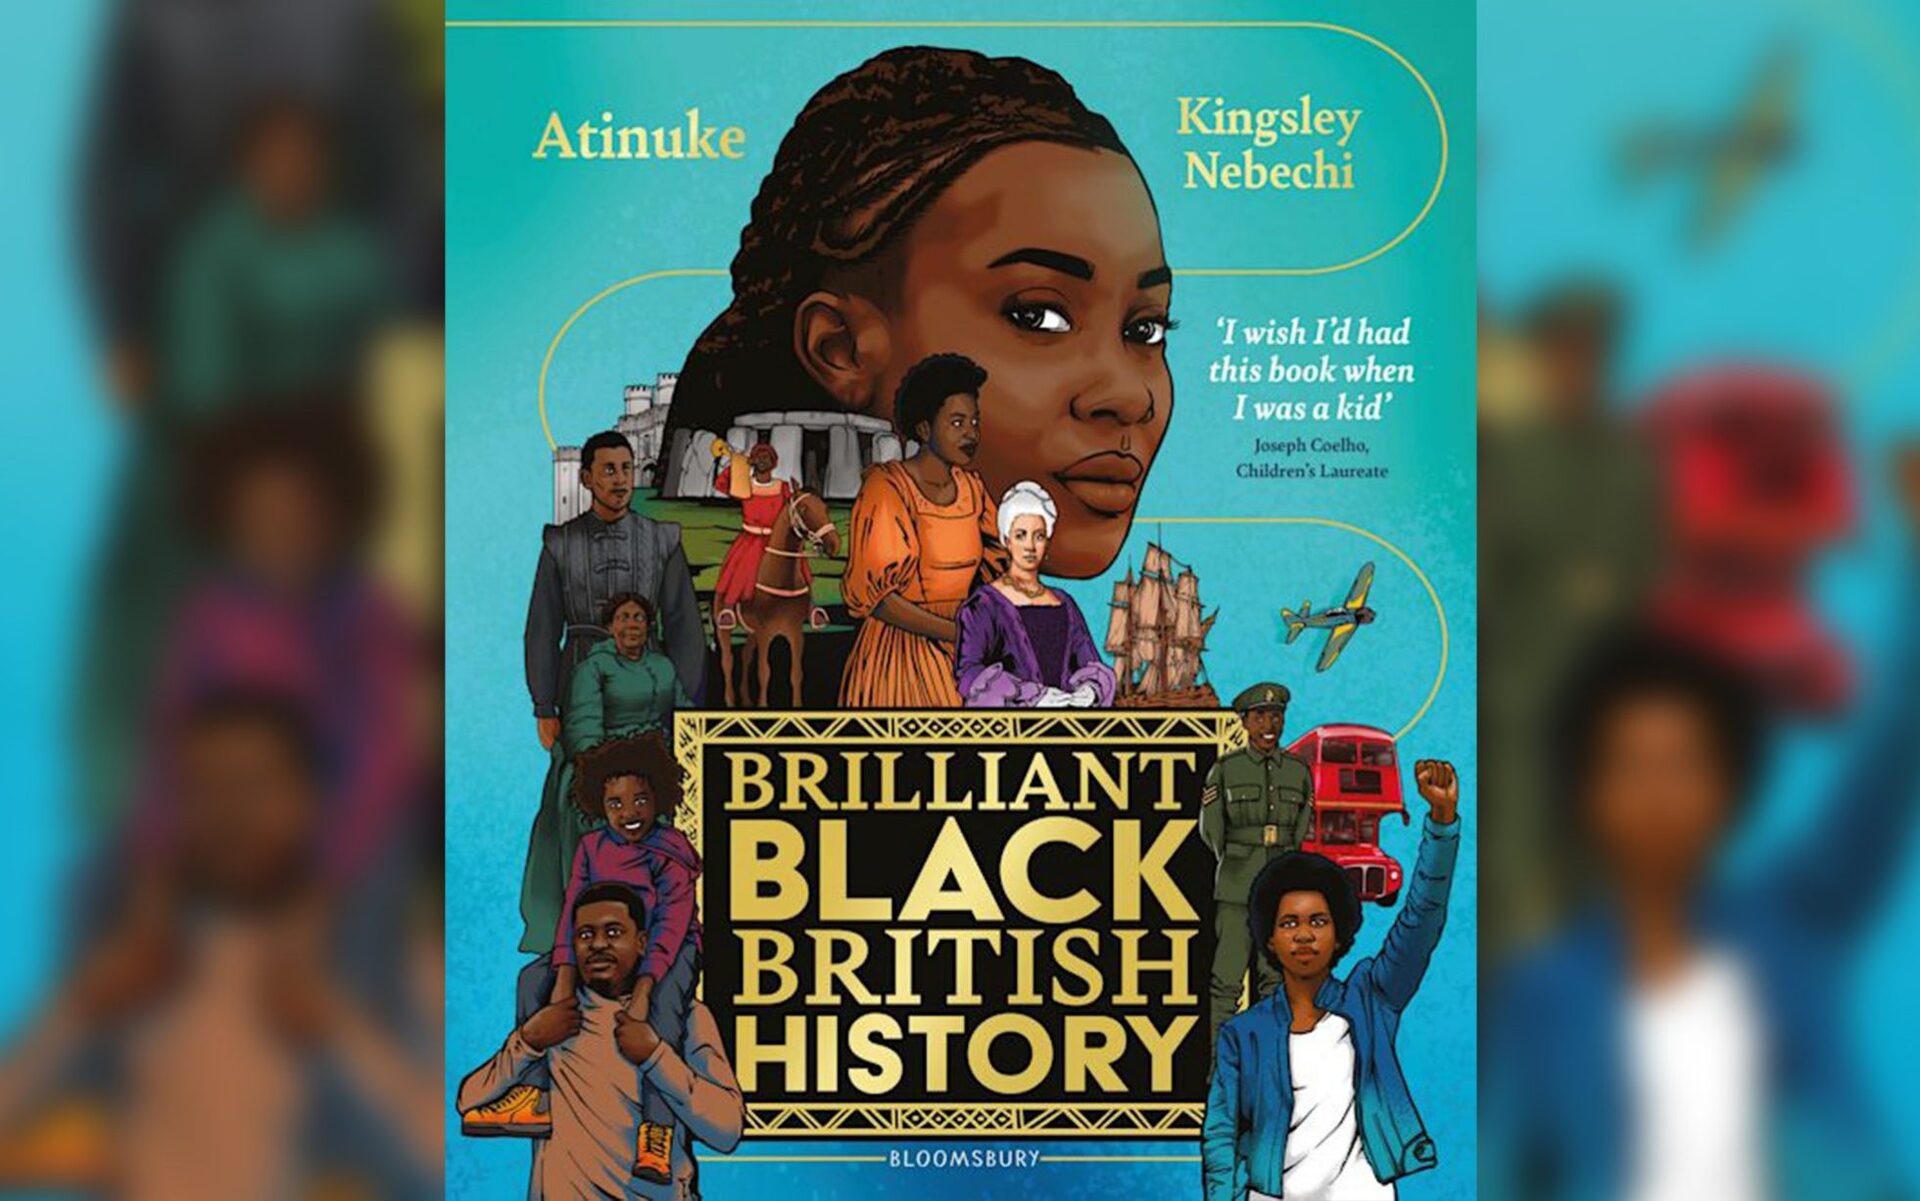 The illustrated book by Nigerian-born British author Atinuke, entitled Brilliant Black British History, says that ‘every single British person comes from a migrant’ 